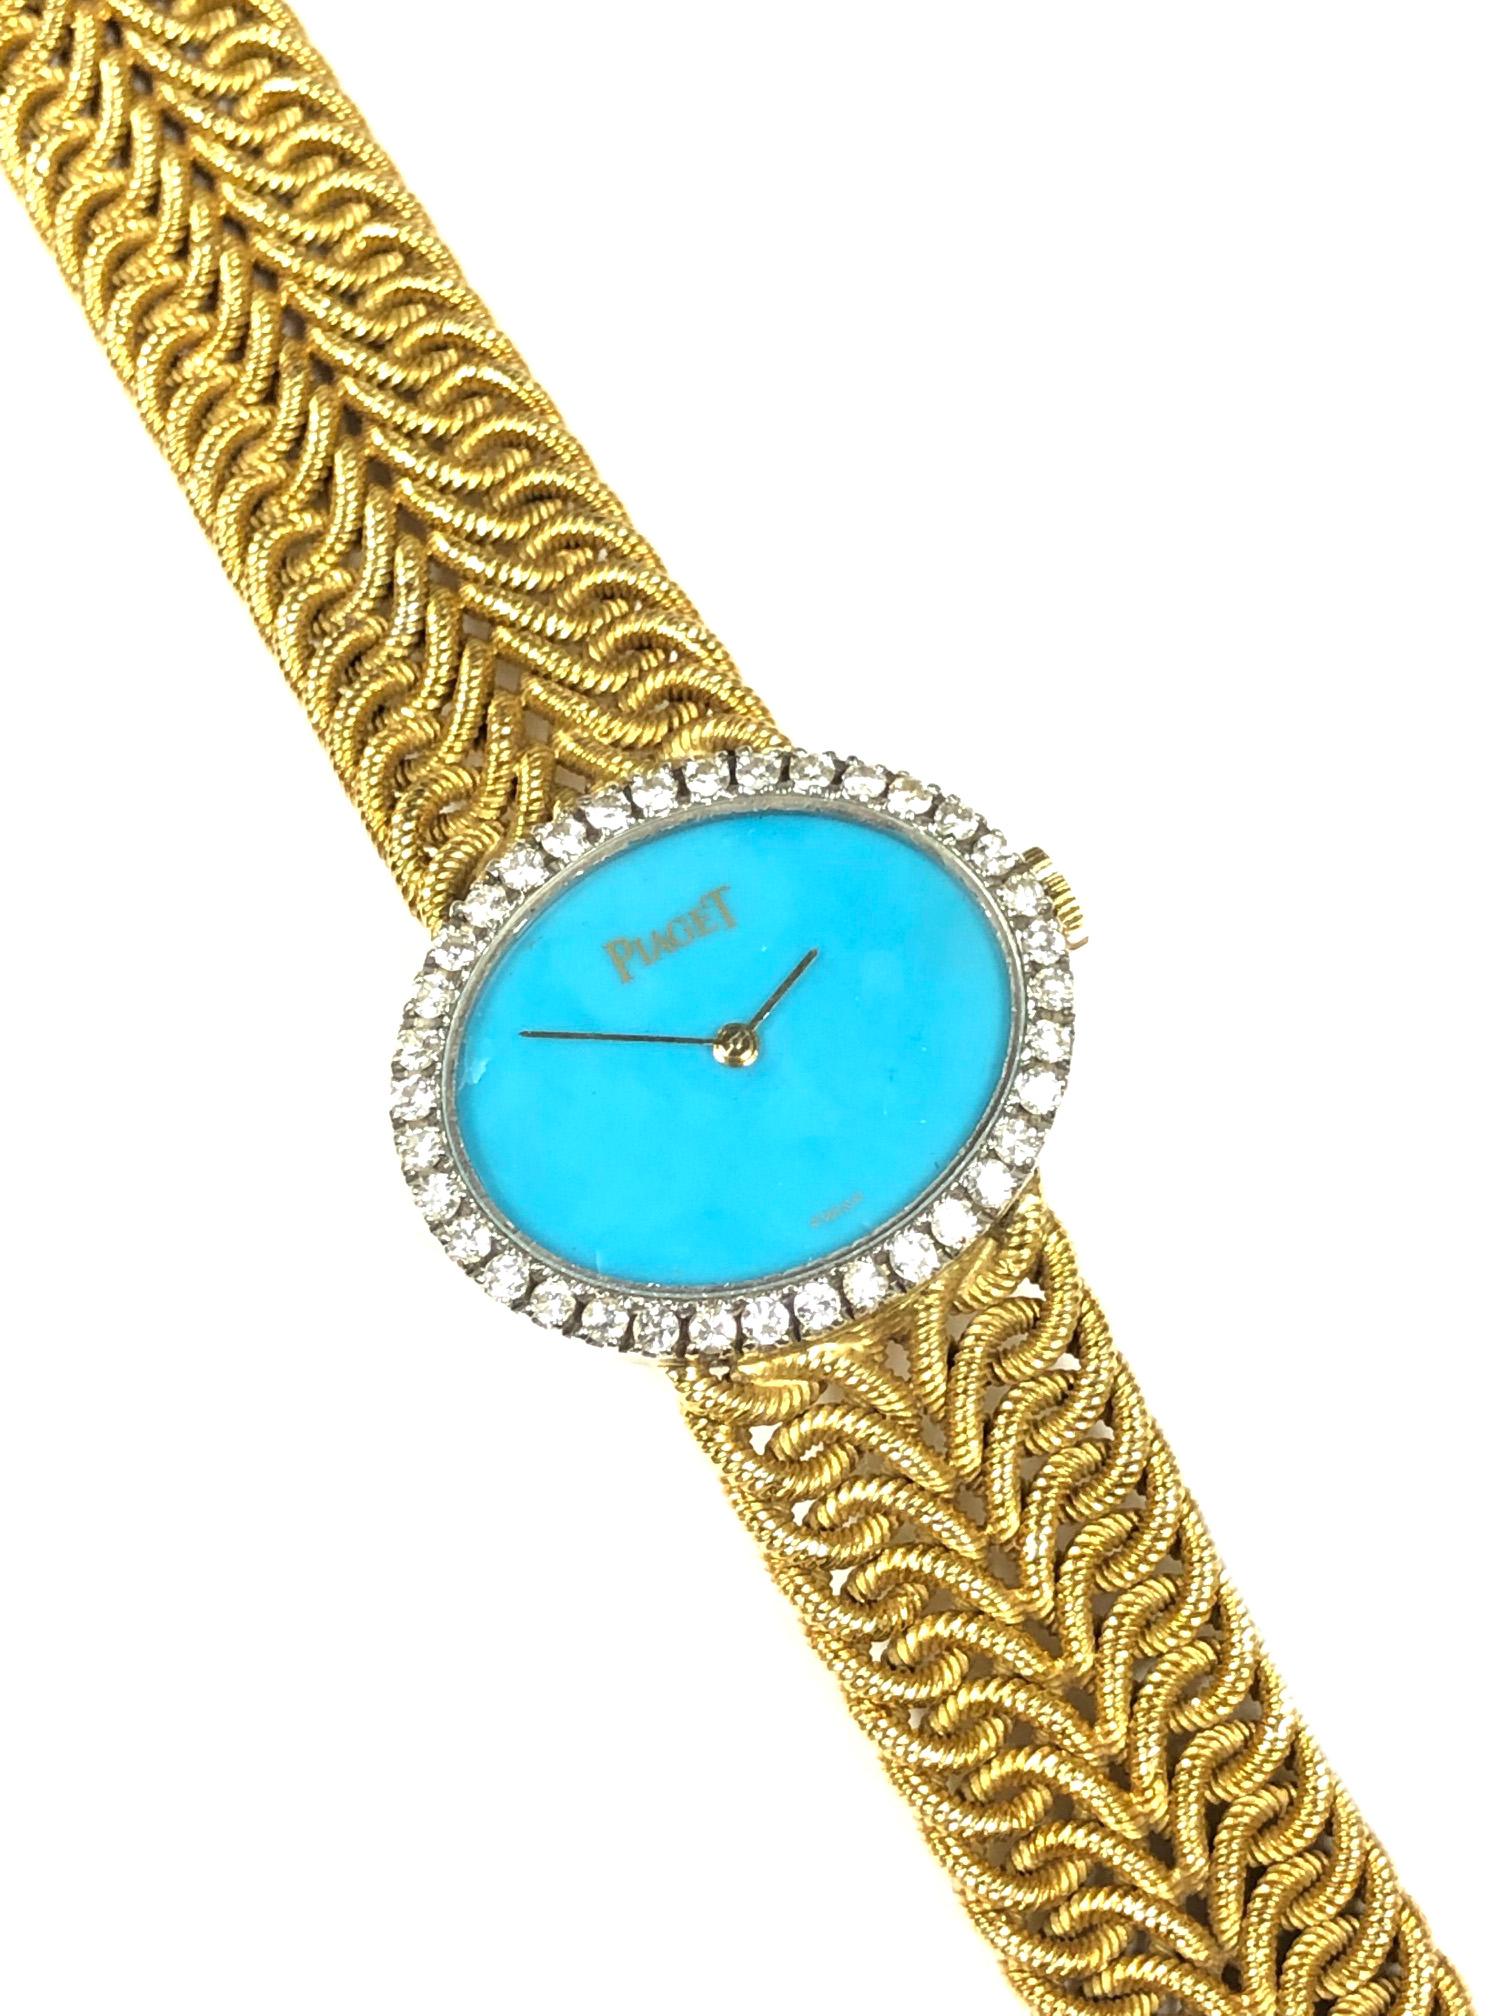 Circa 1980 Piaget Ladies Wrist Watch, 25 X 21 MM 18K yellow gold 2 Piece case with a Piaget Factory set Diamond Bezel of Round Brilliant cuts totaling approximately 1 Carat.  17 Jewel mechanical, Manual Wind Movement, Turquoise Dial. 5/8 inch wide